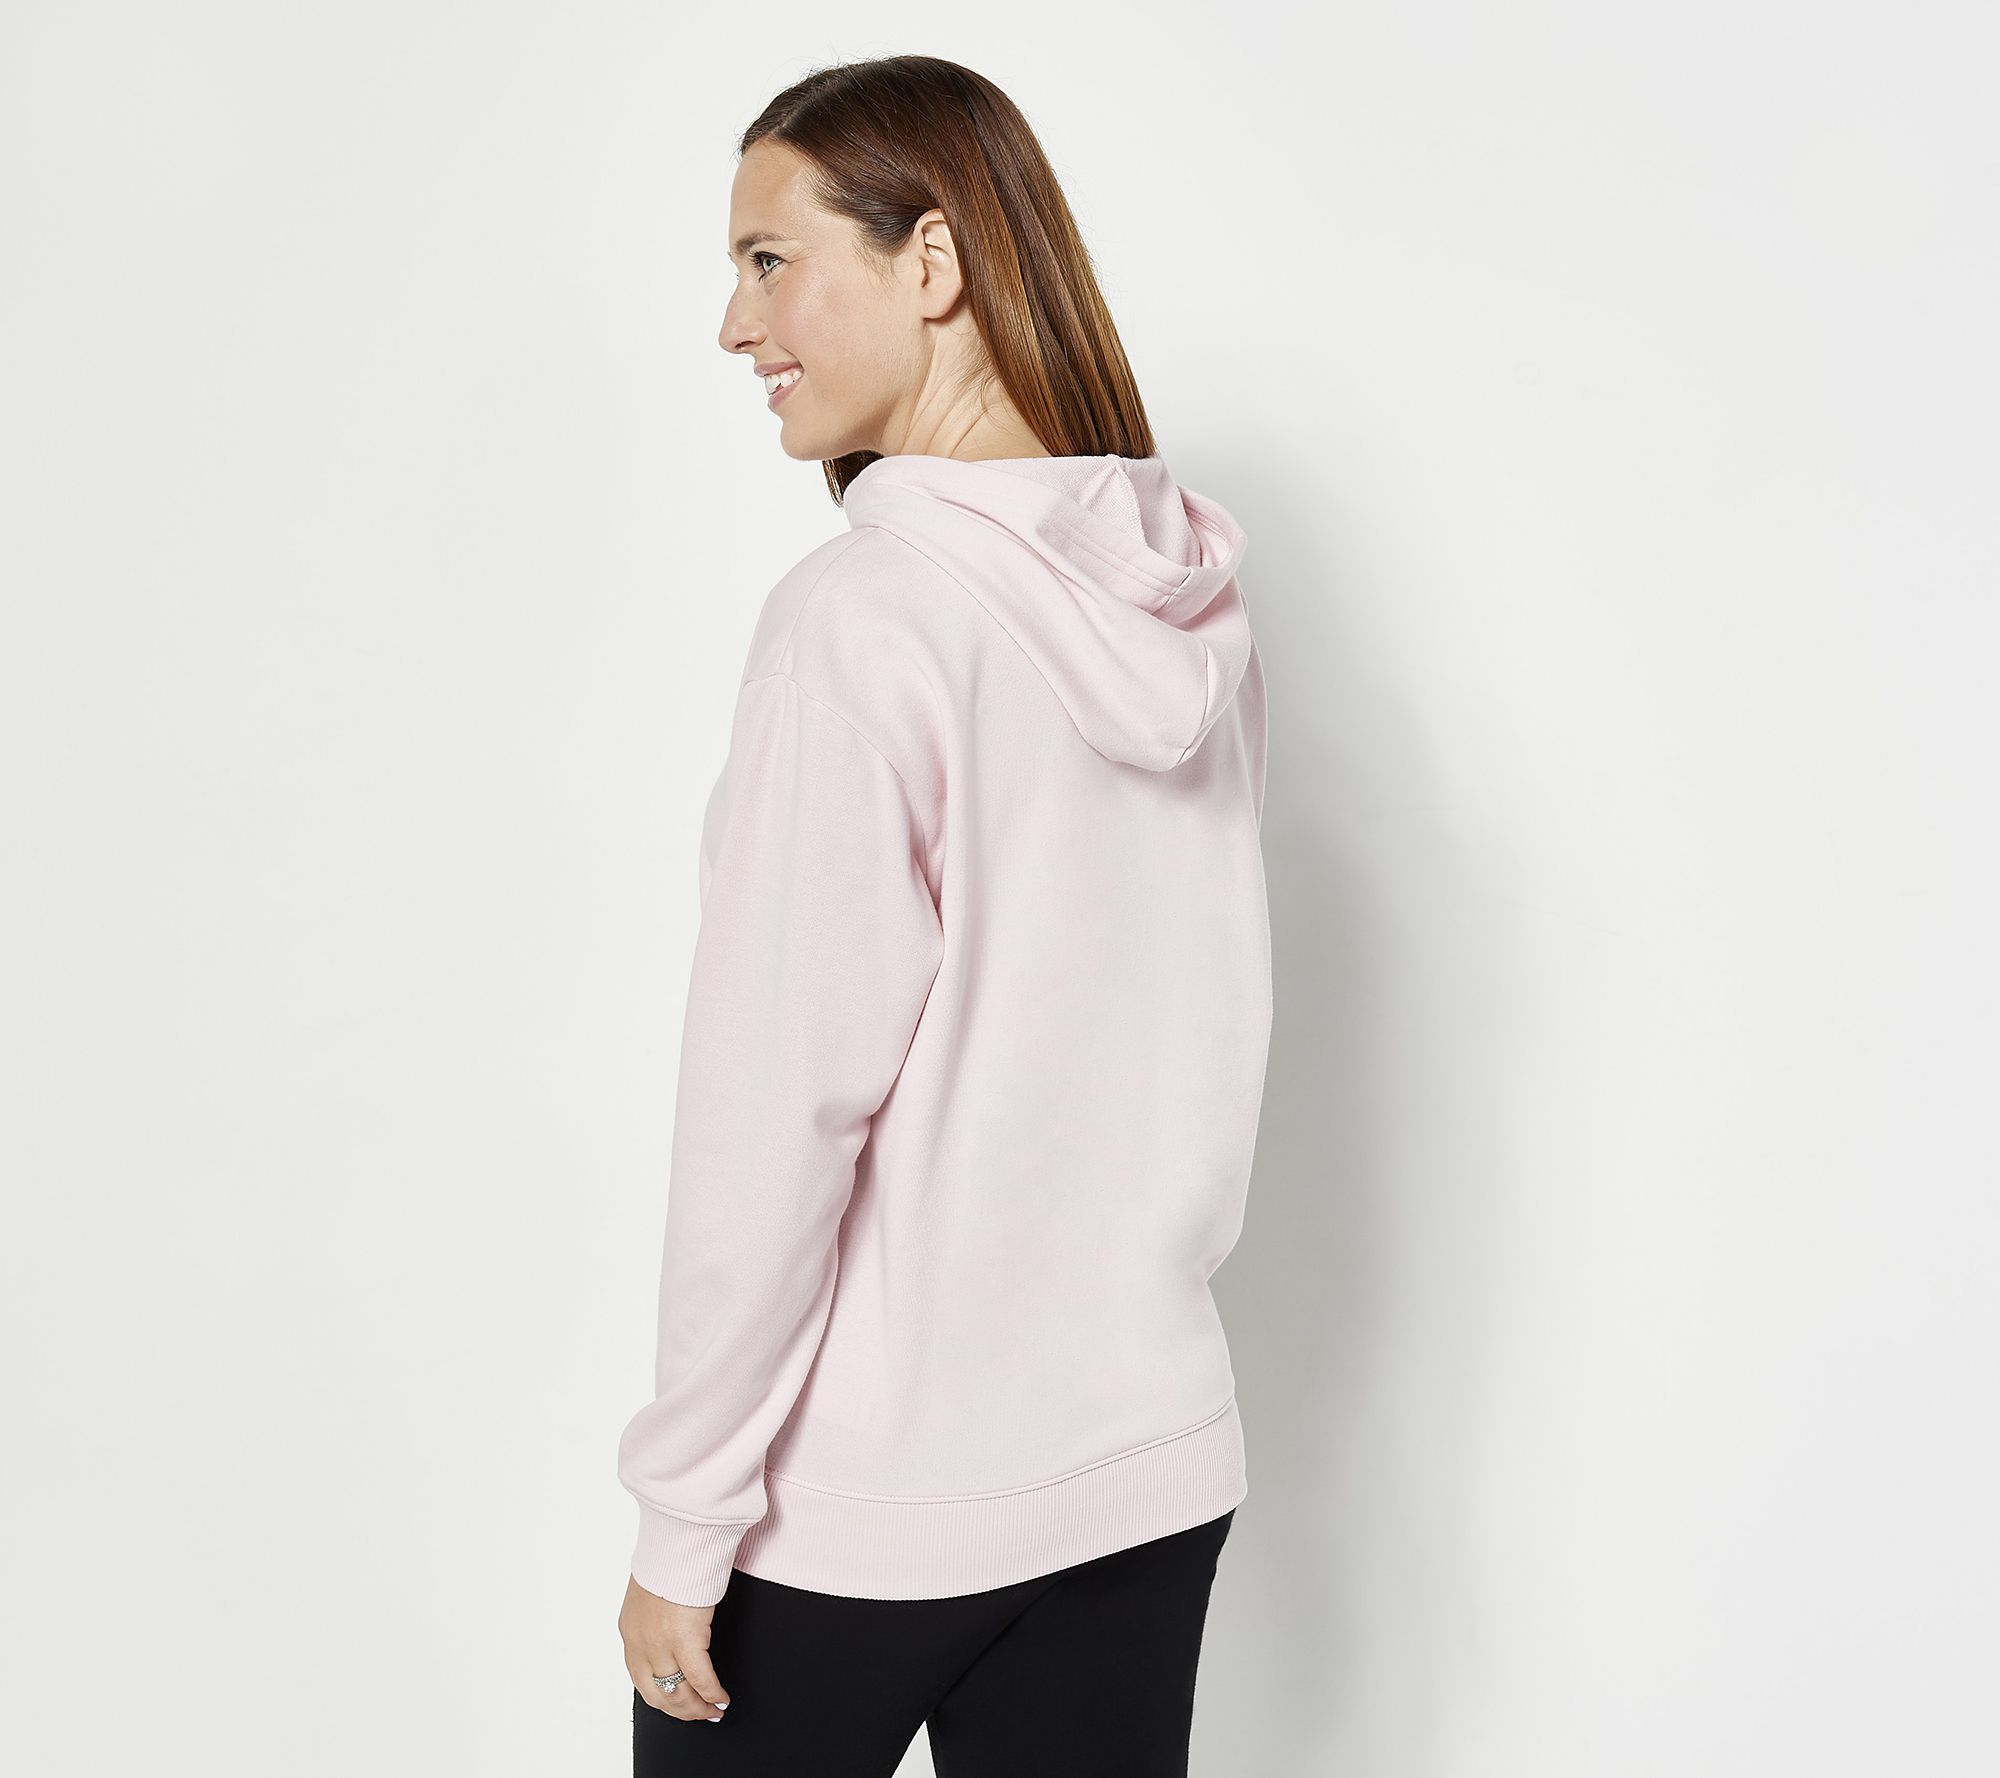 Skechers BOBS Bonjour Pooch Pouch Pullover Hoodie - QVC.com